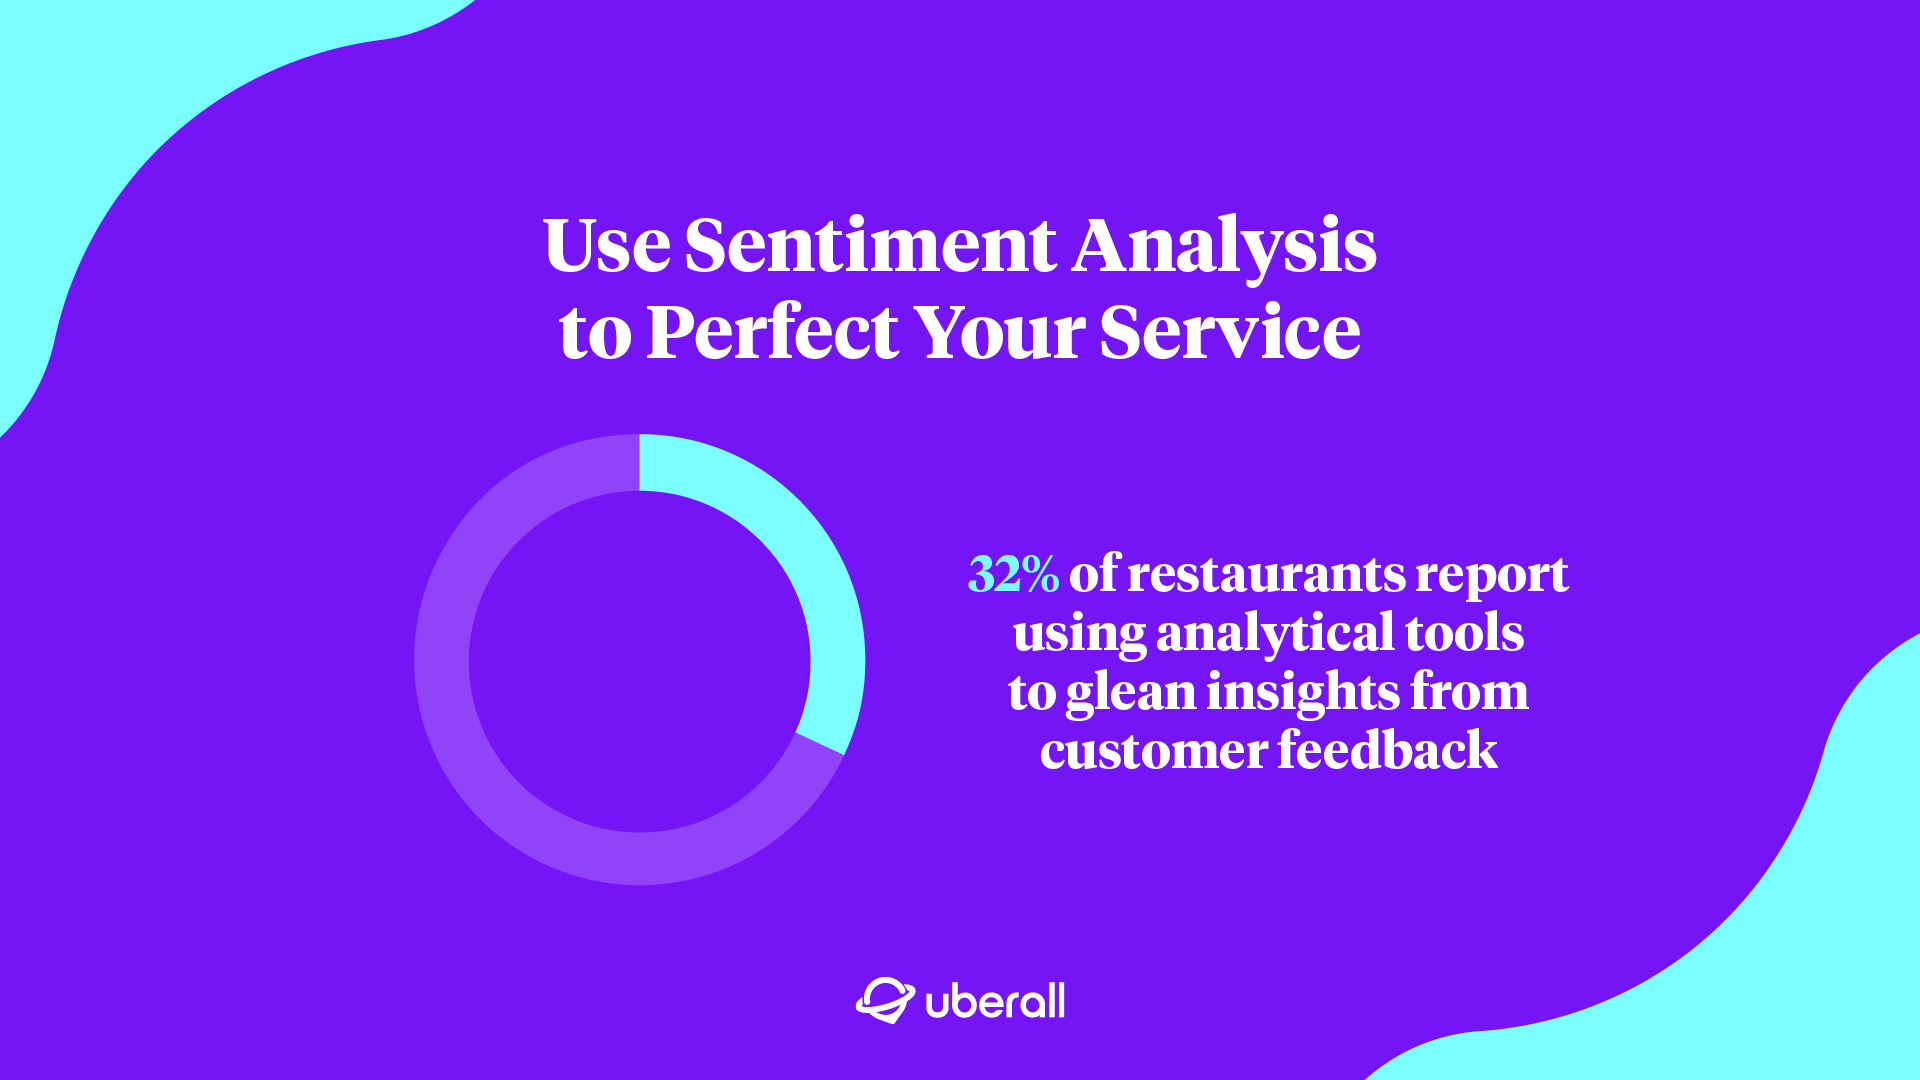 Use Sentiment Analysis to Perfect Your Service